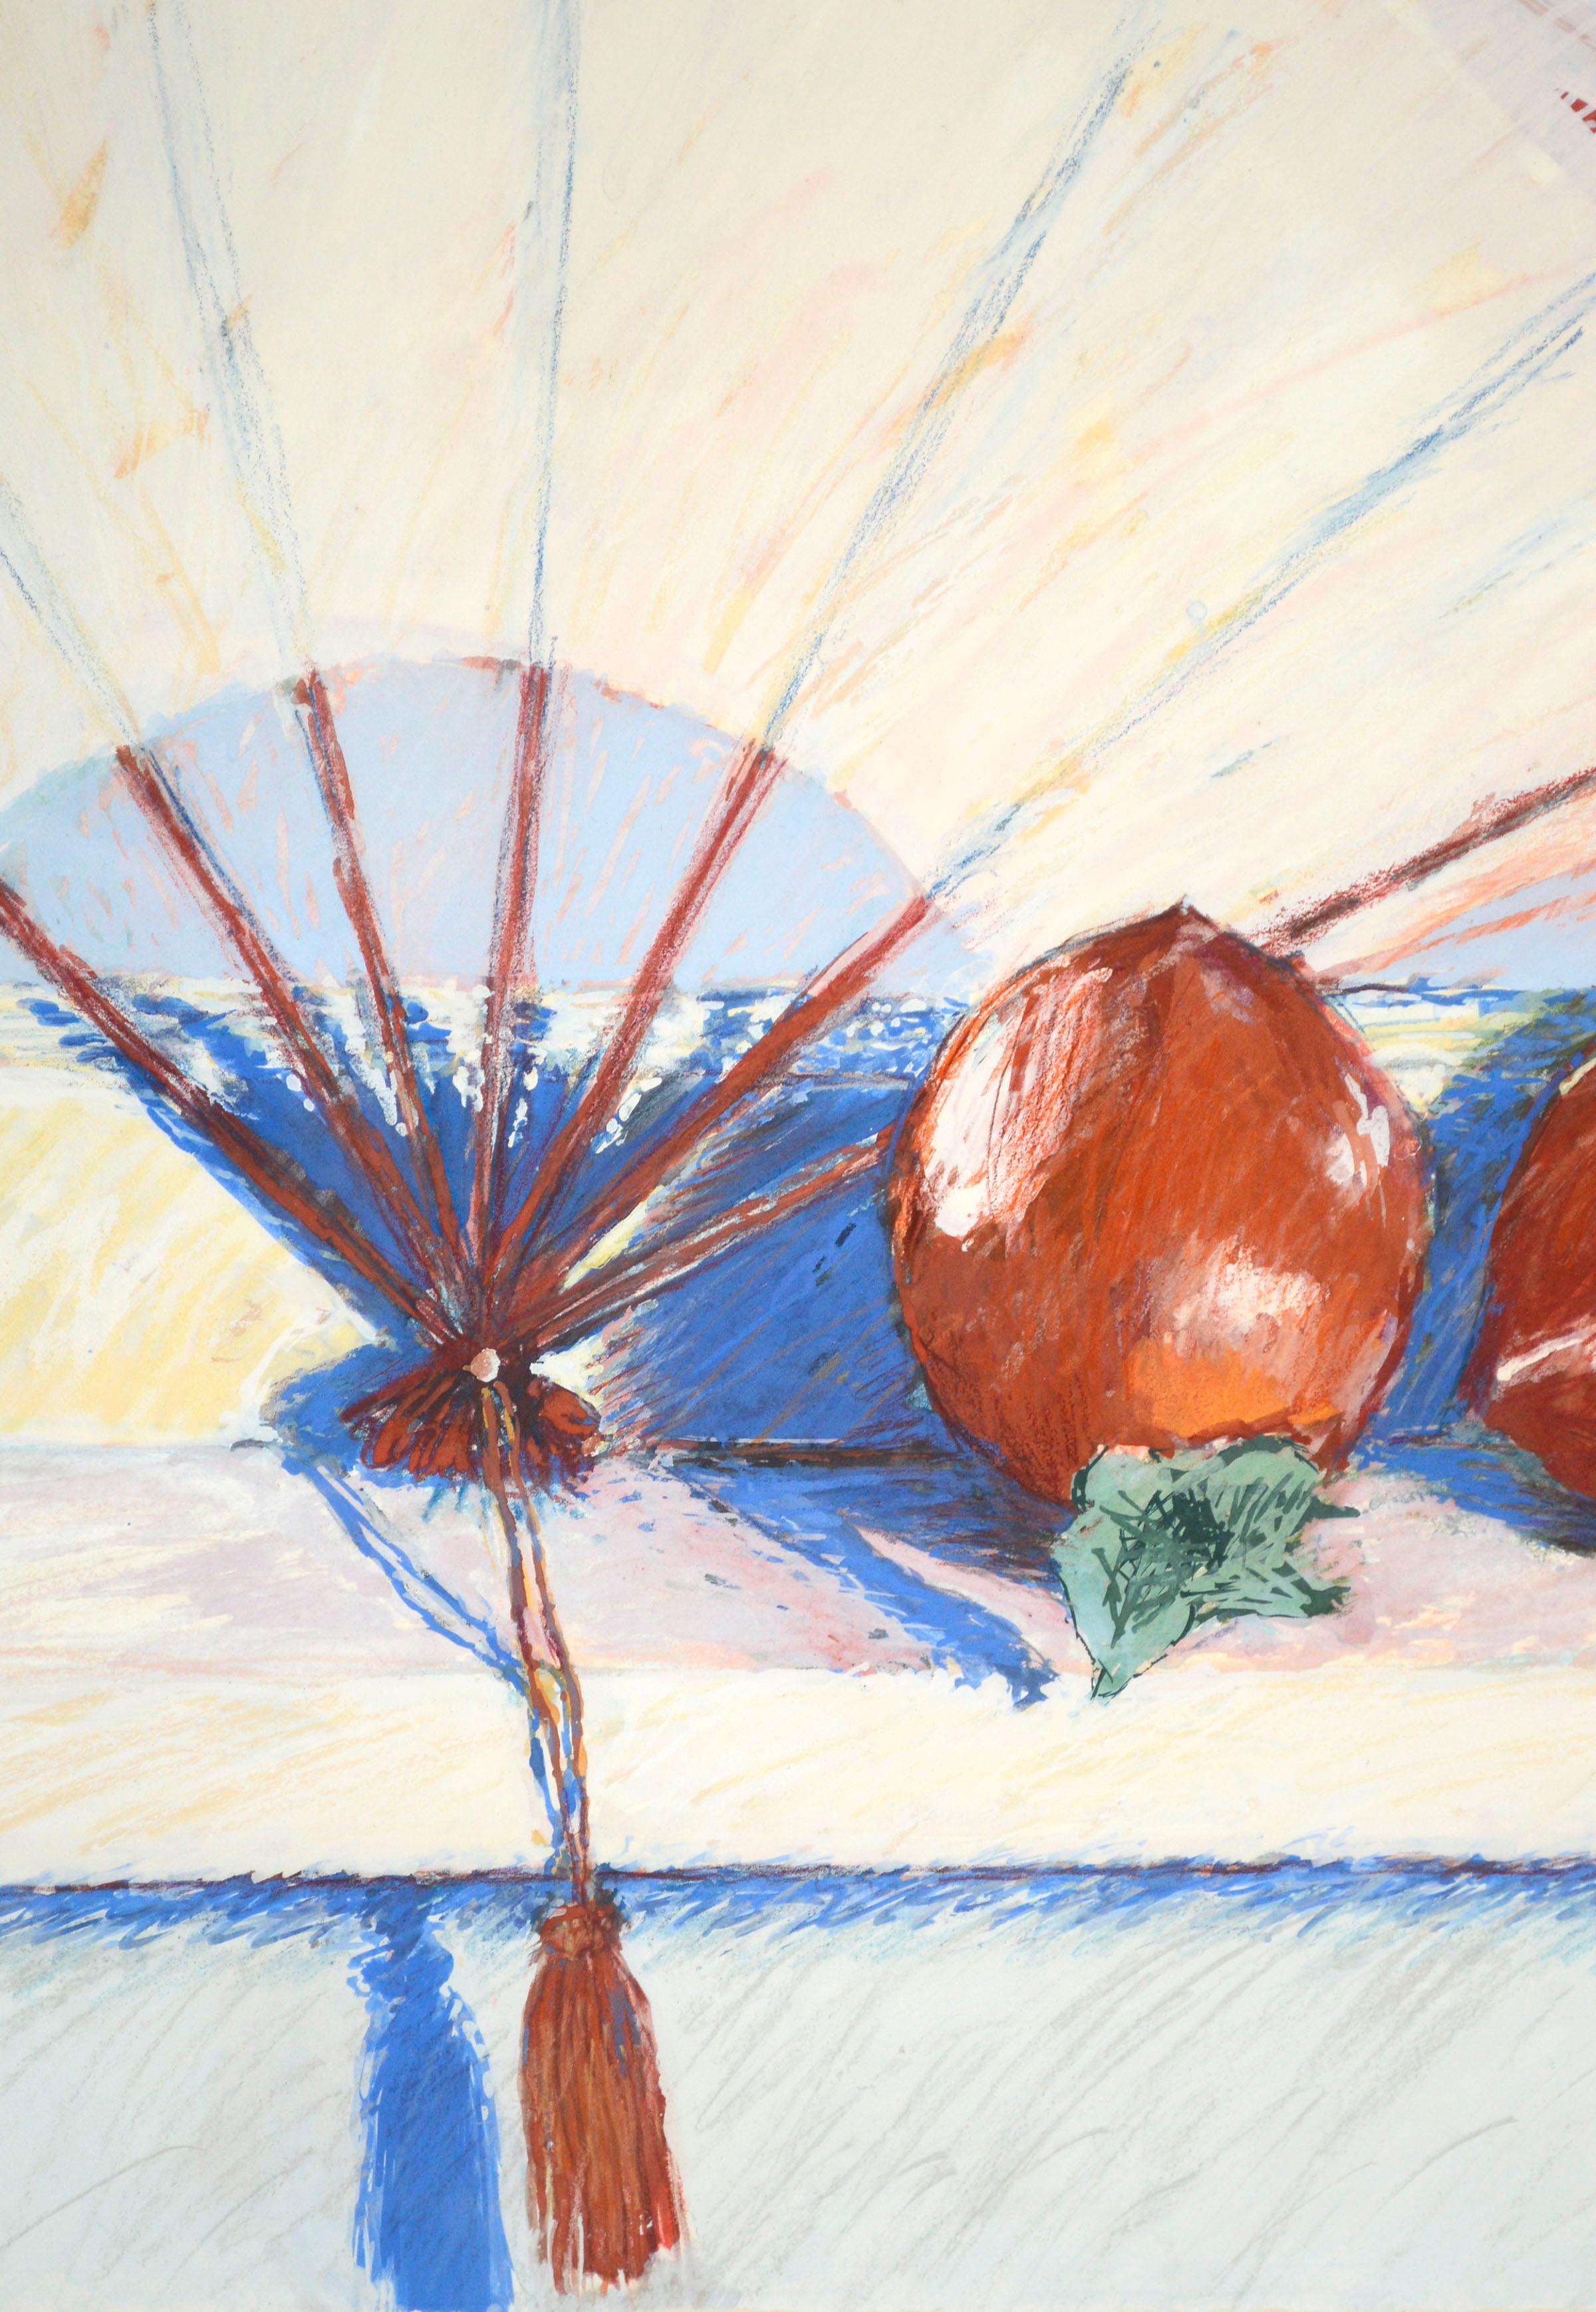 Hachiya Persimmons & Fan, Modern Still Life with Red-Orange and Blue  - American Impressionist Art by Anita Heckman